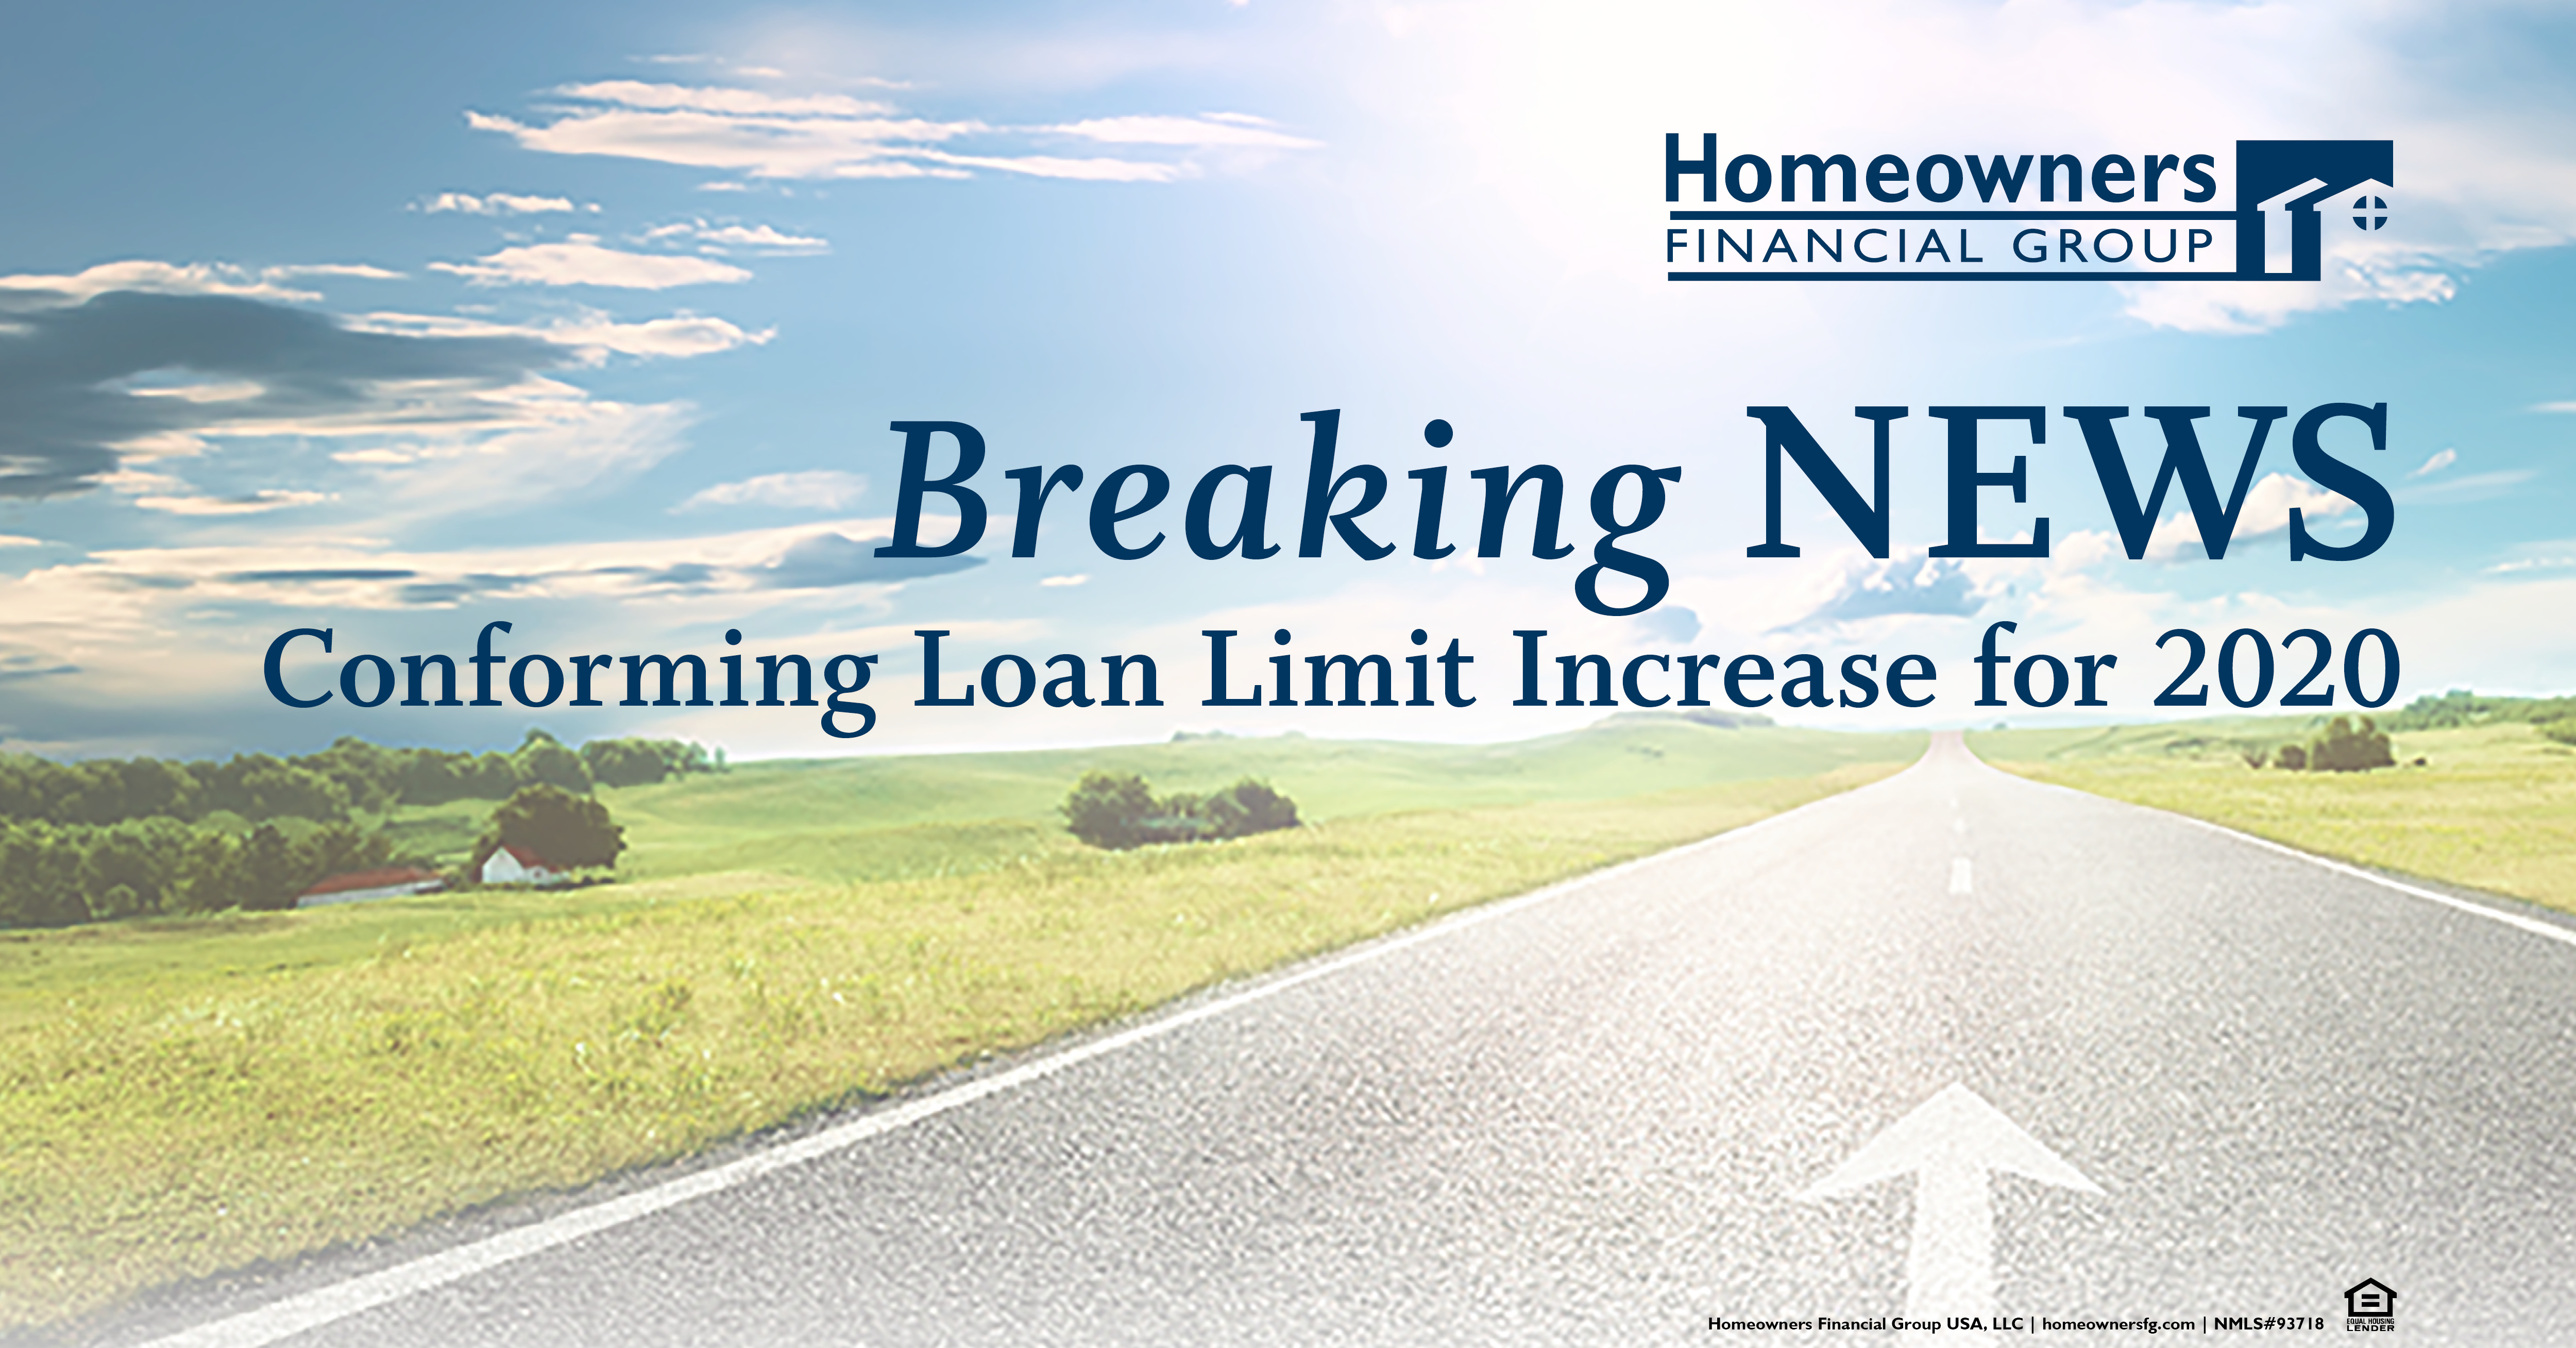 Conforming Loan Limit Increase for 2020